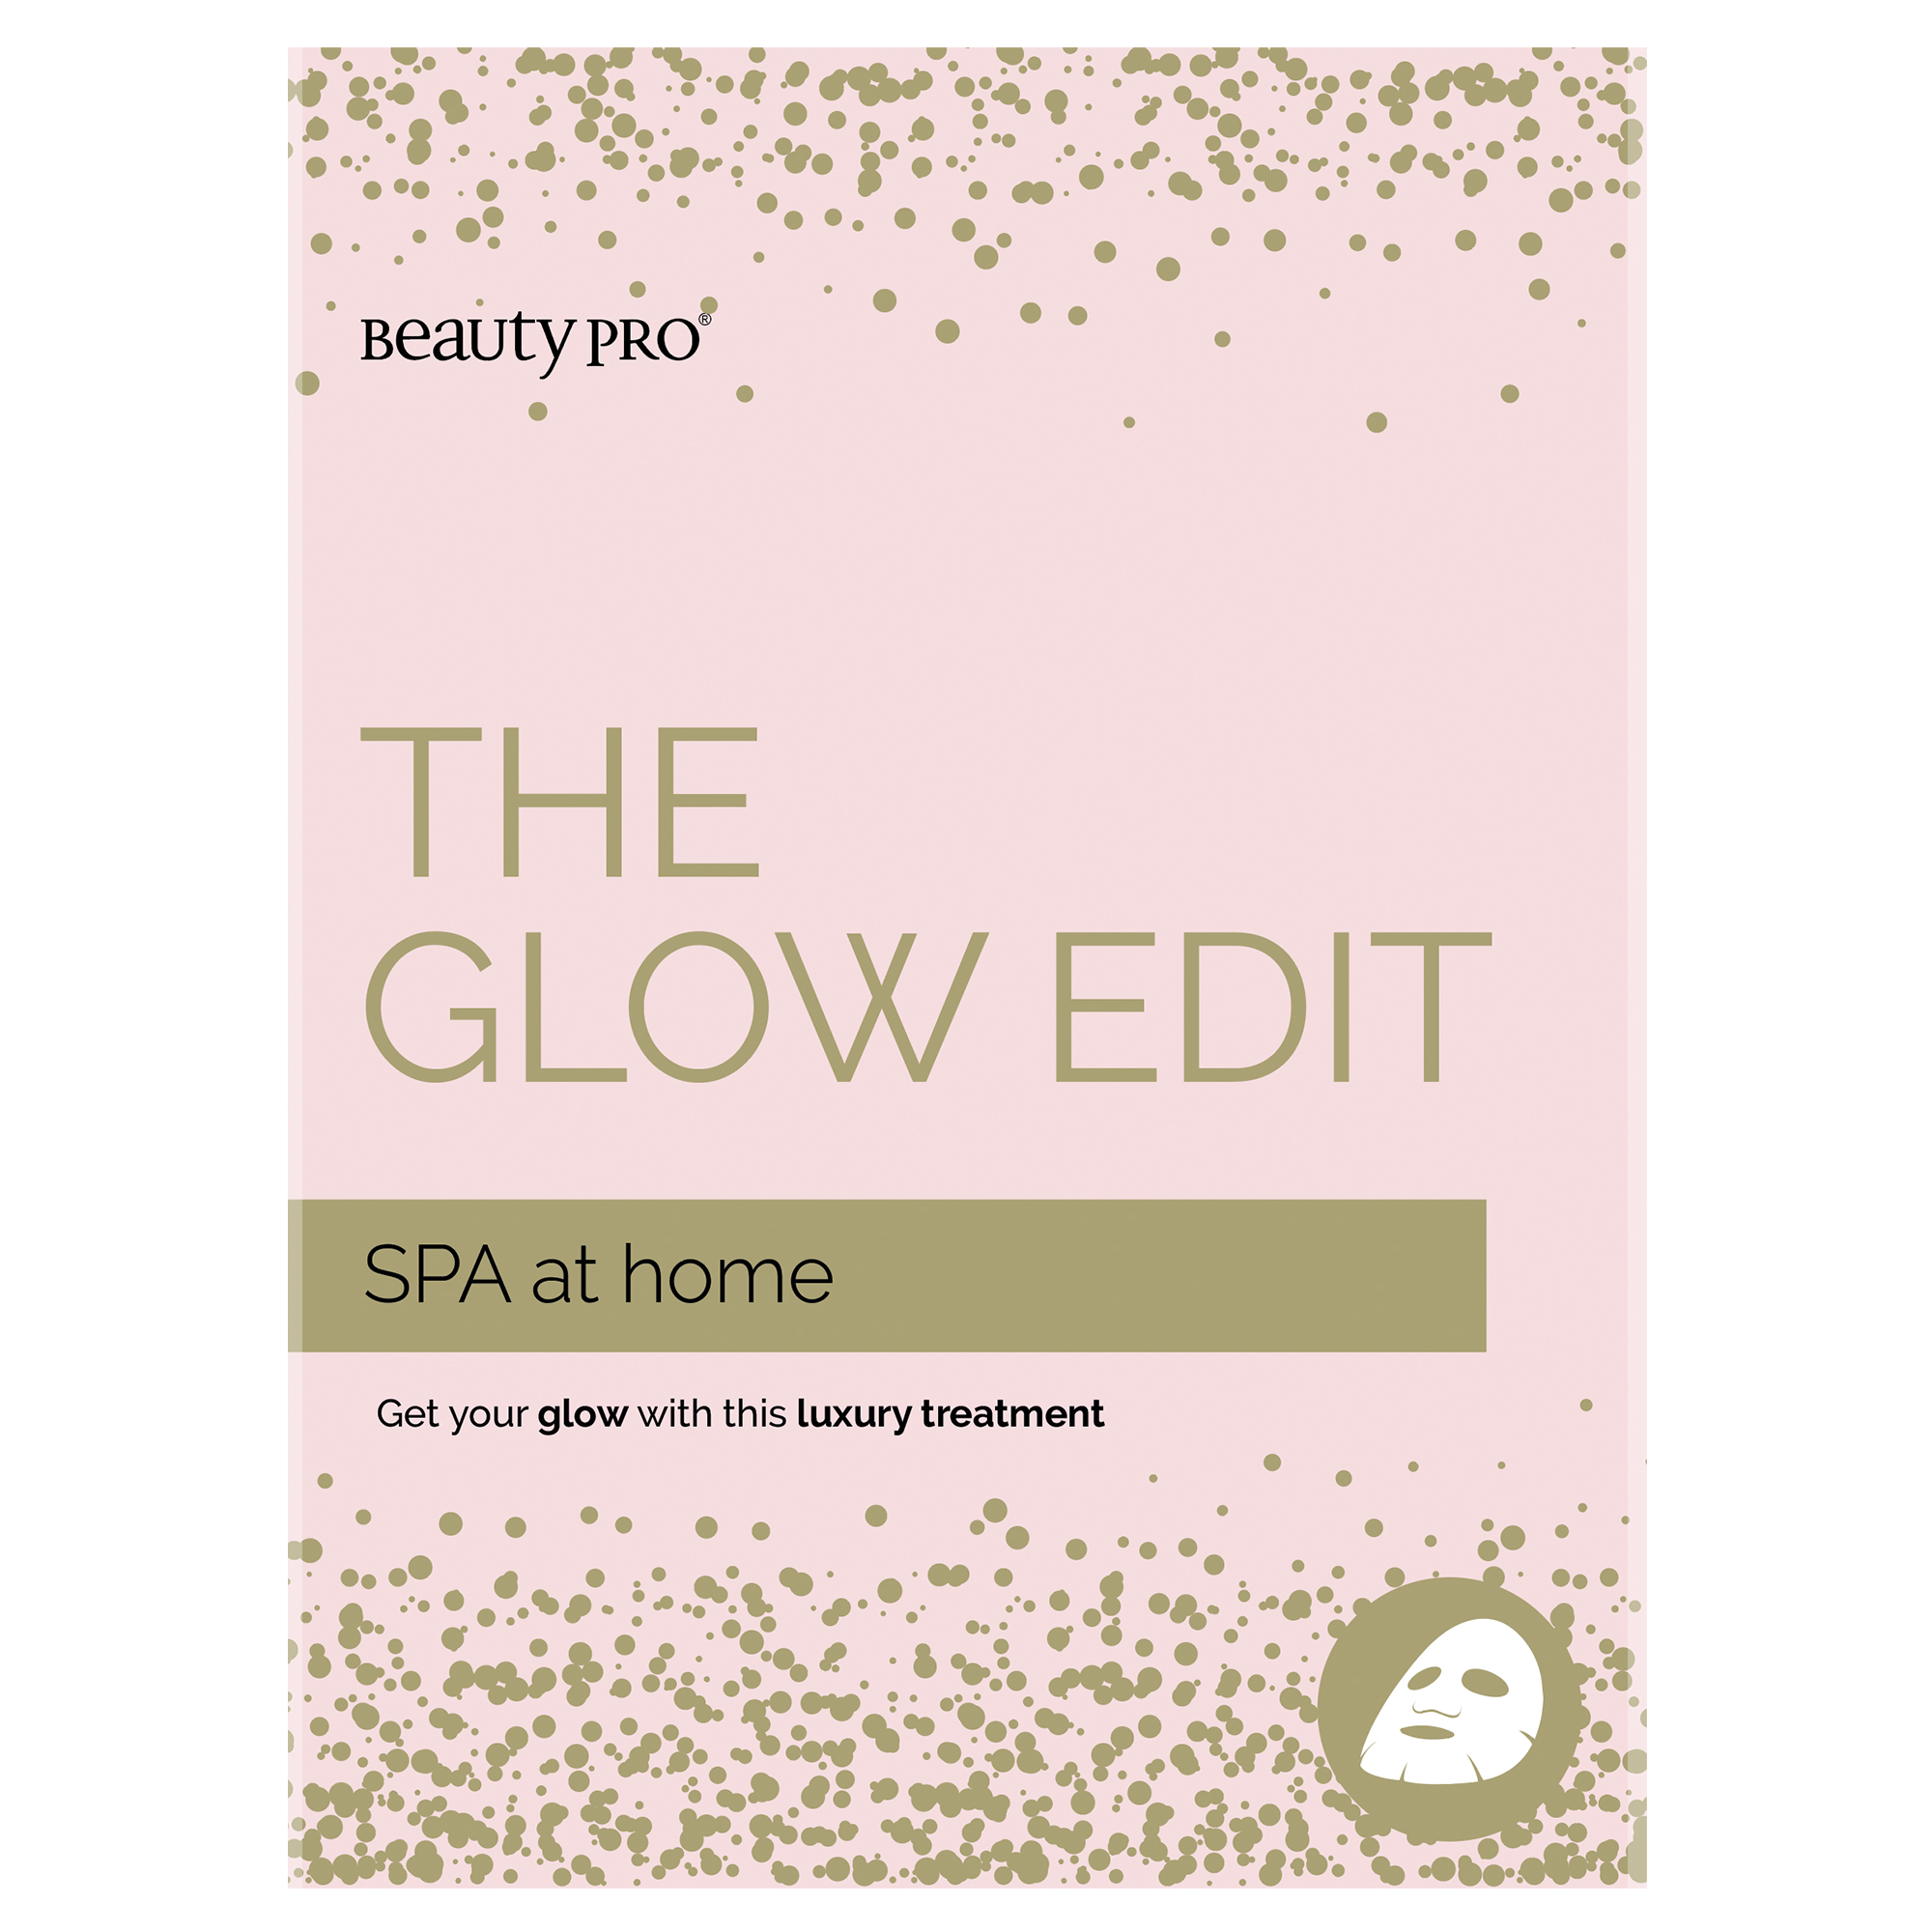 SPA at home: THE GLOW EDIT